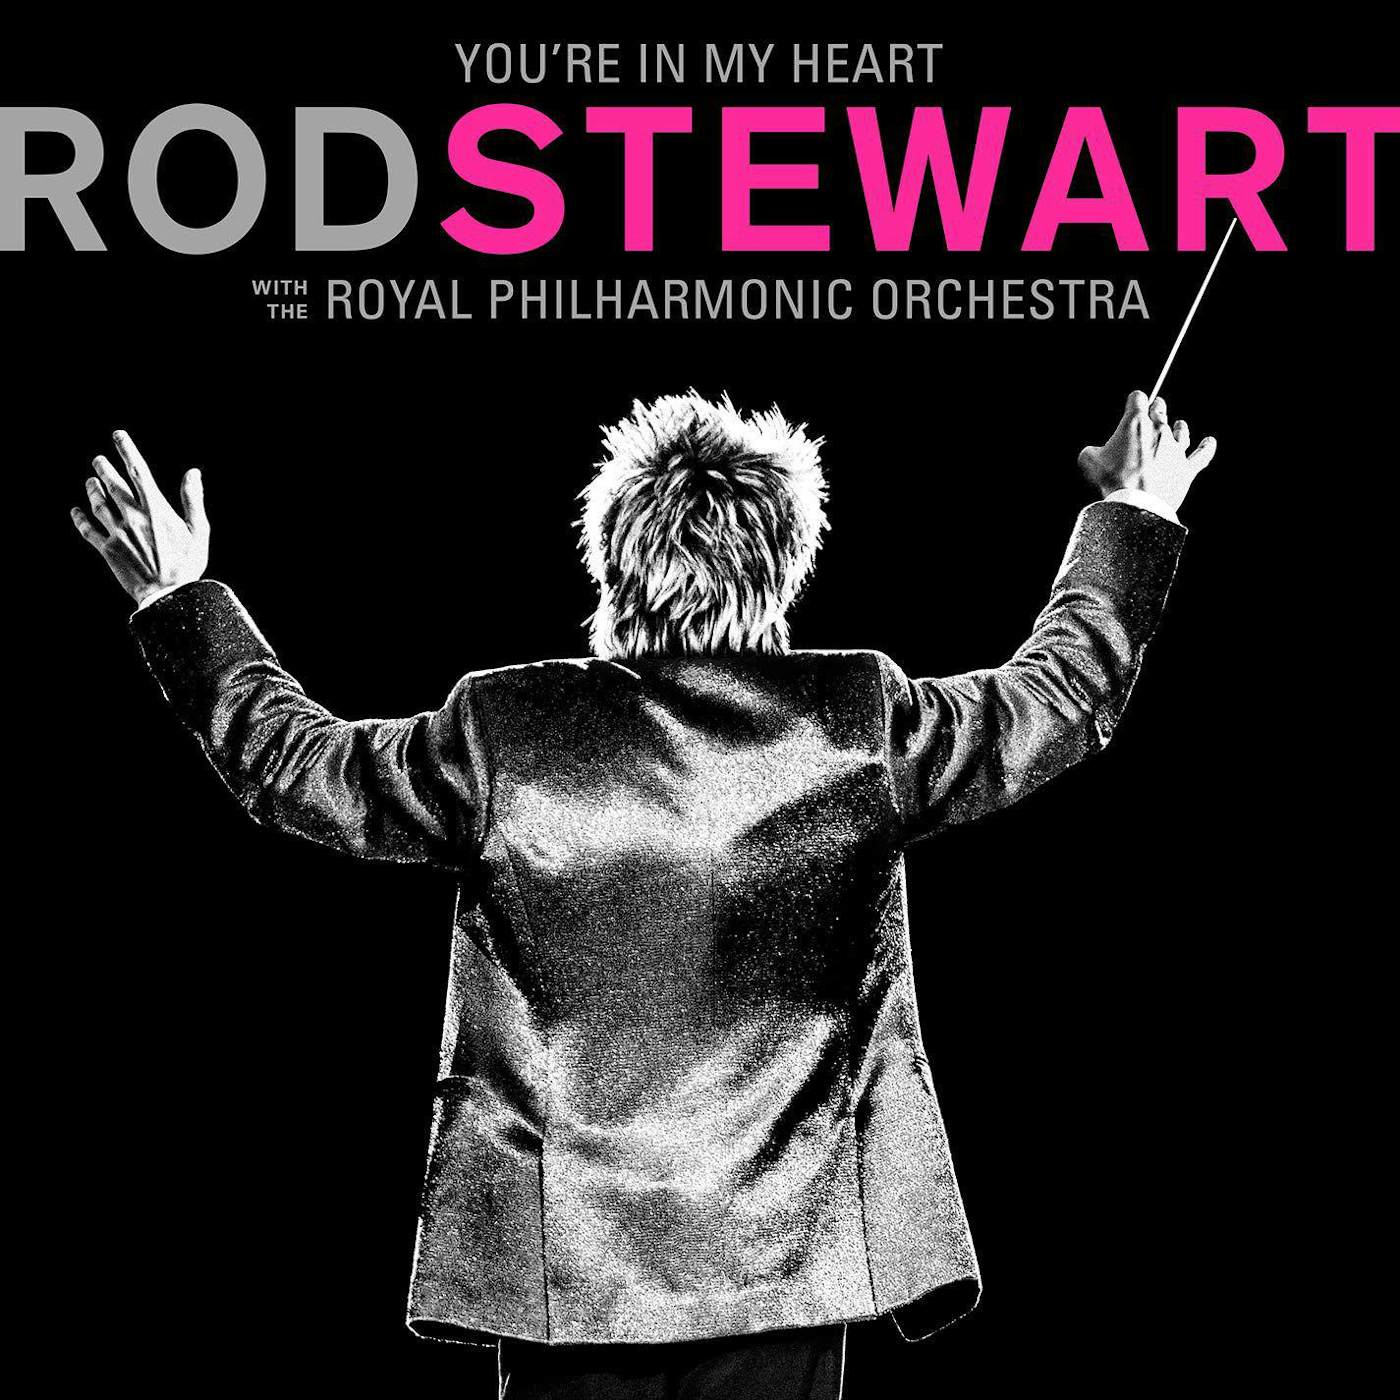 You're In My Heart: Rod Stewart With The Royal Philharmonic Orchestra (2LP/Pink) (I) Vinyl Record